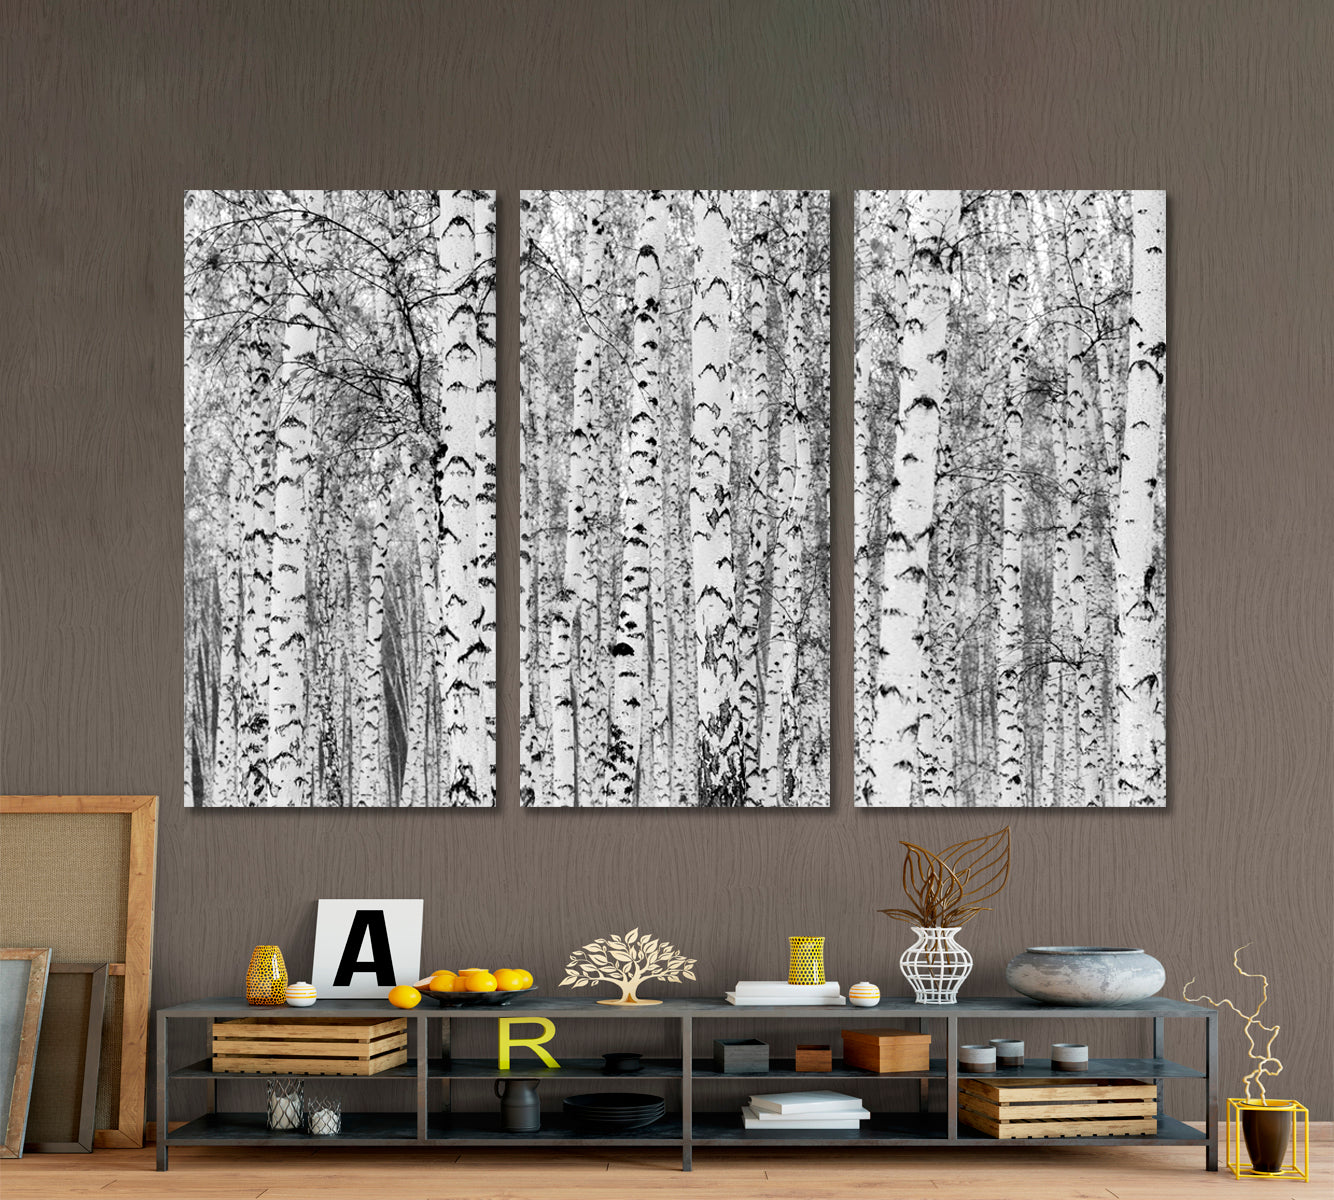 Birch Forest Winter Landscape Black and White Photo Print Nature Wall Canvas Print Artesty 3 panels 36" x 24" 